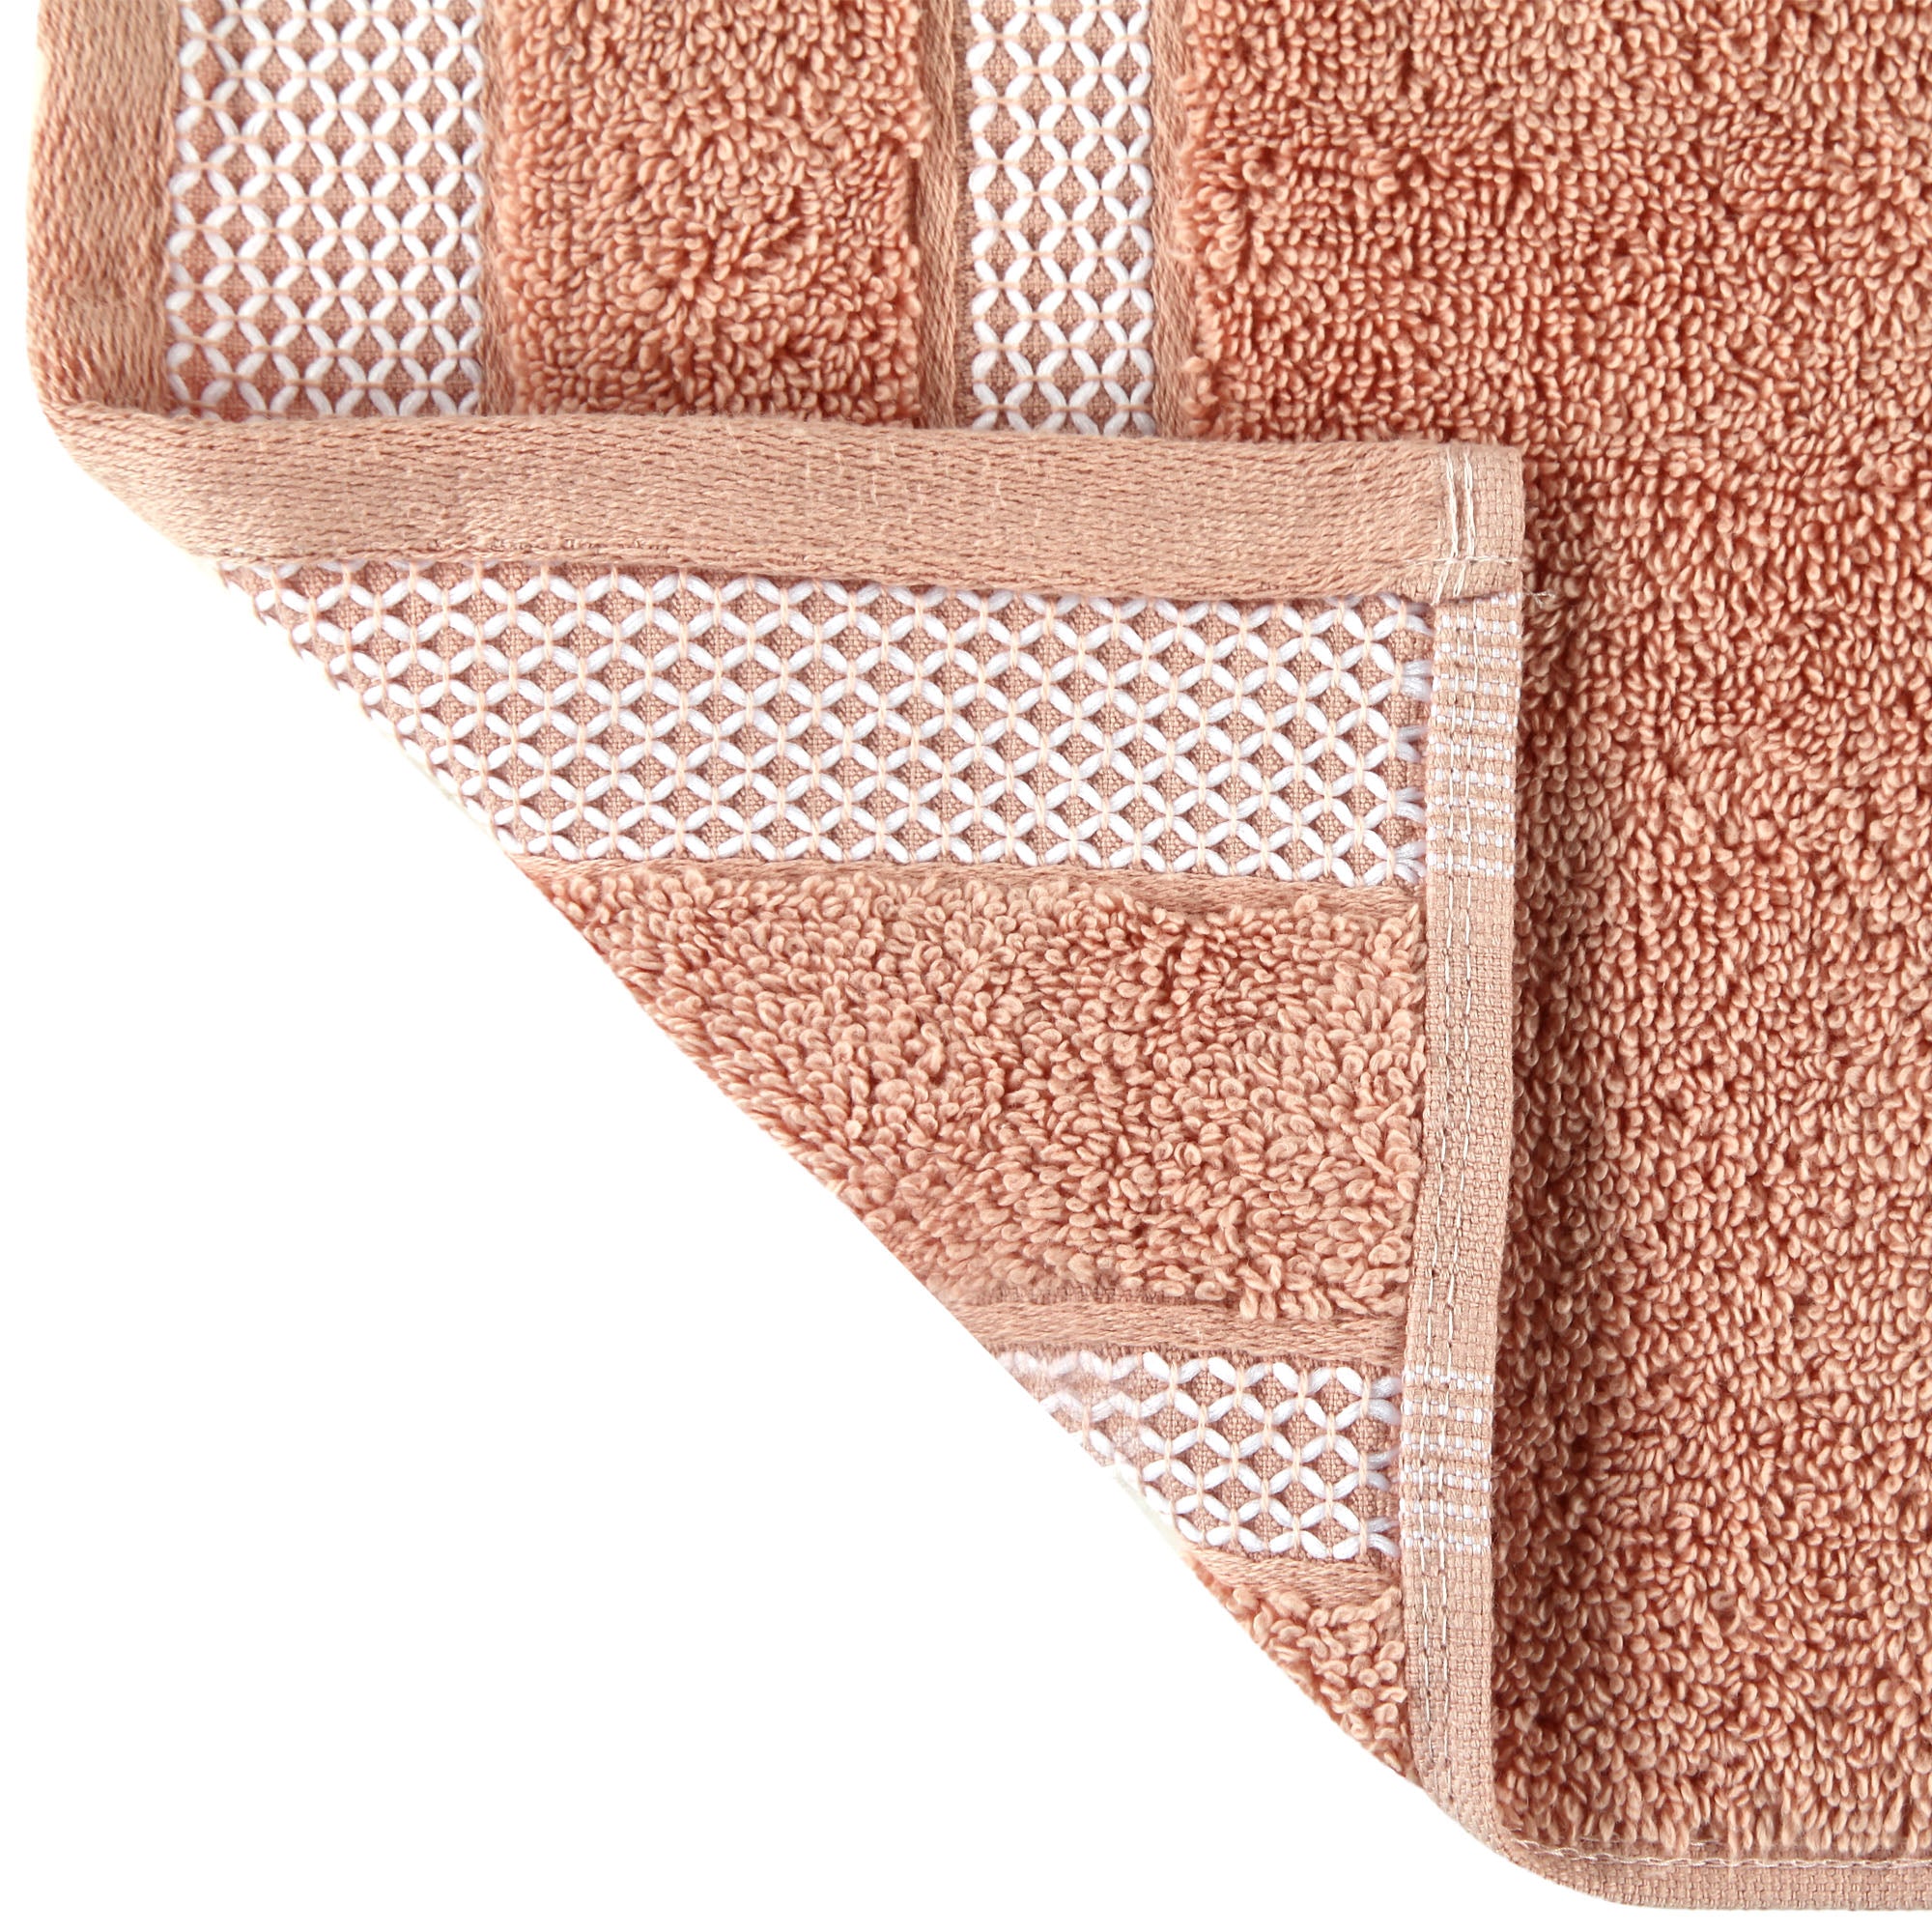 Spaces Hygro Small 2 Pcs Hand Towel Set 600 GSM(Coral)